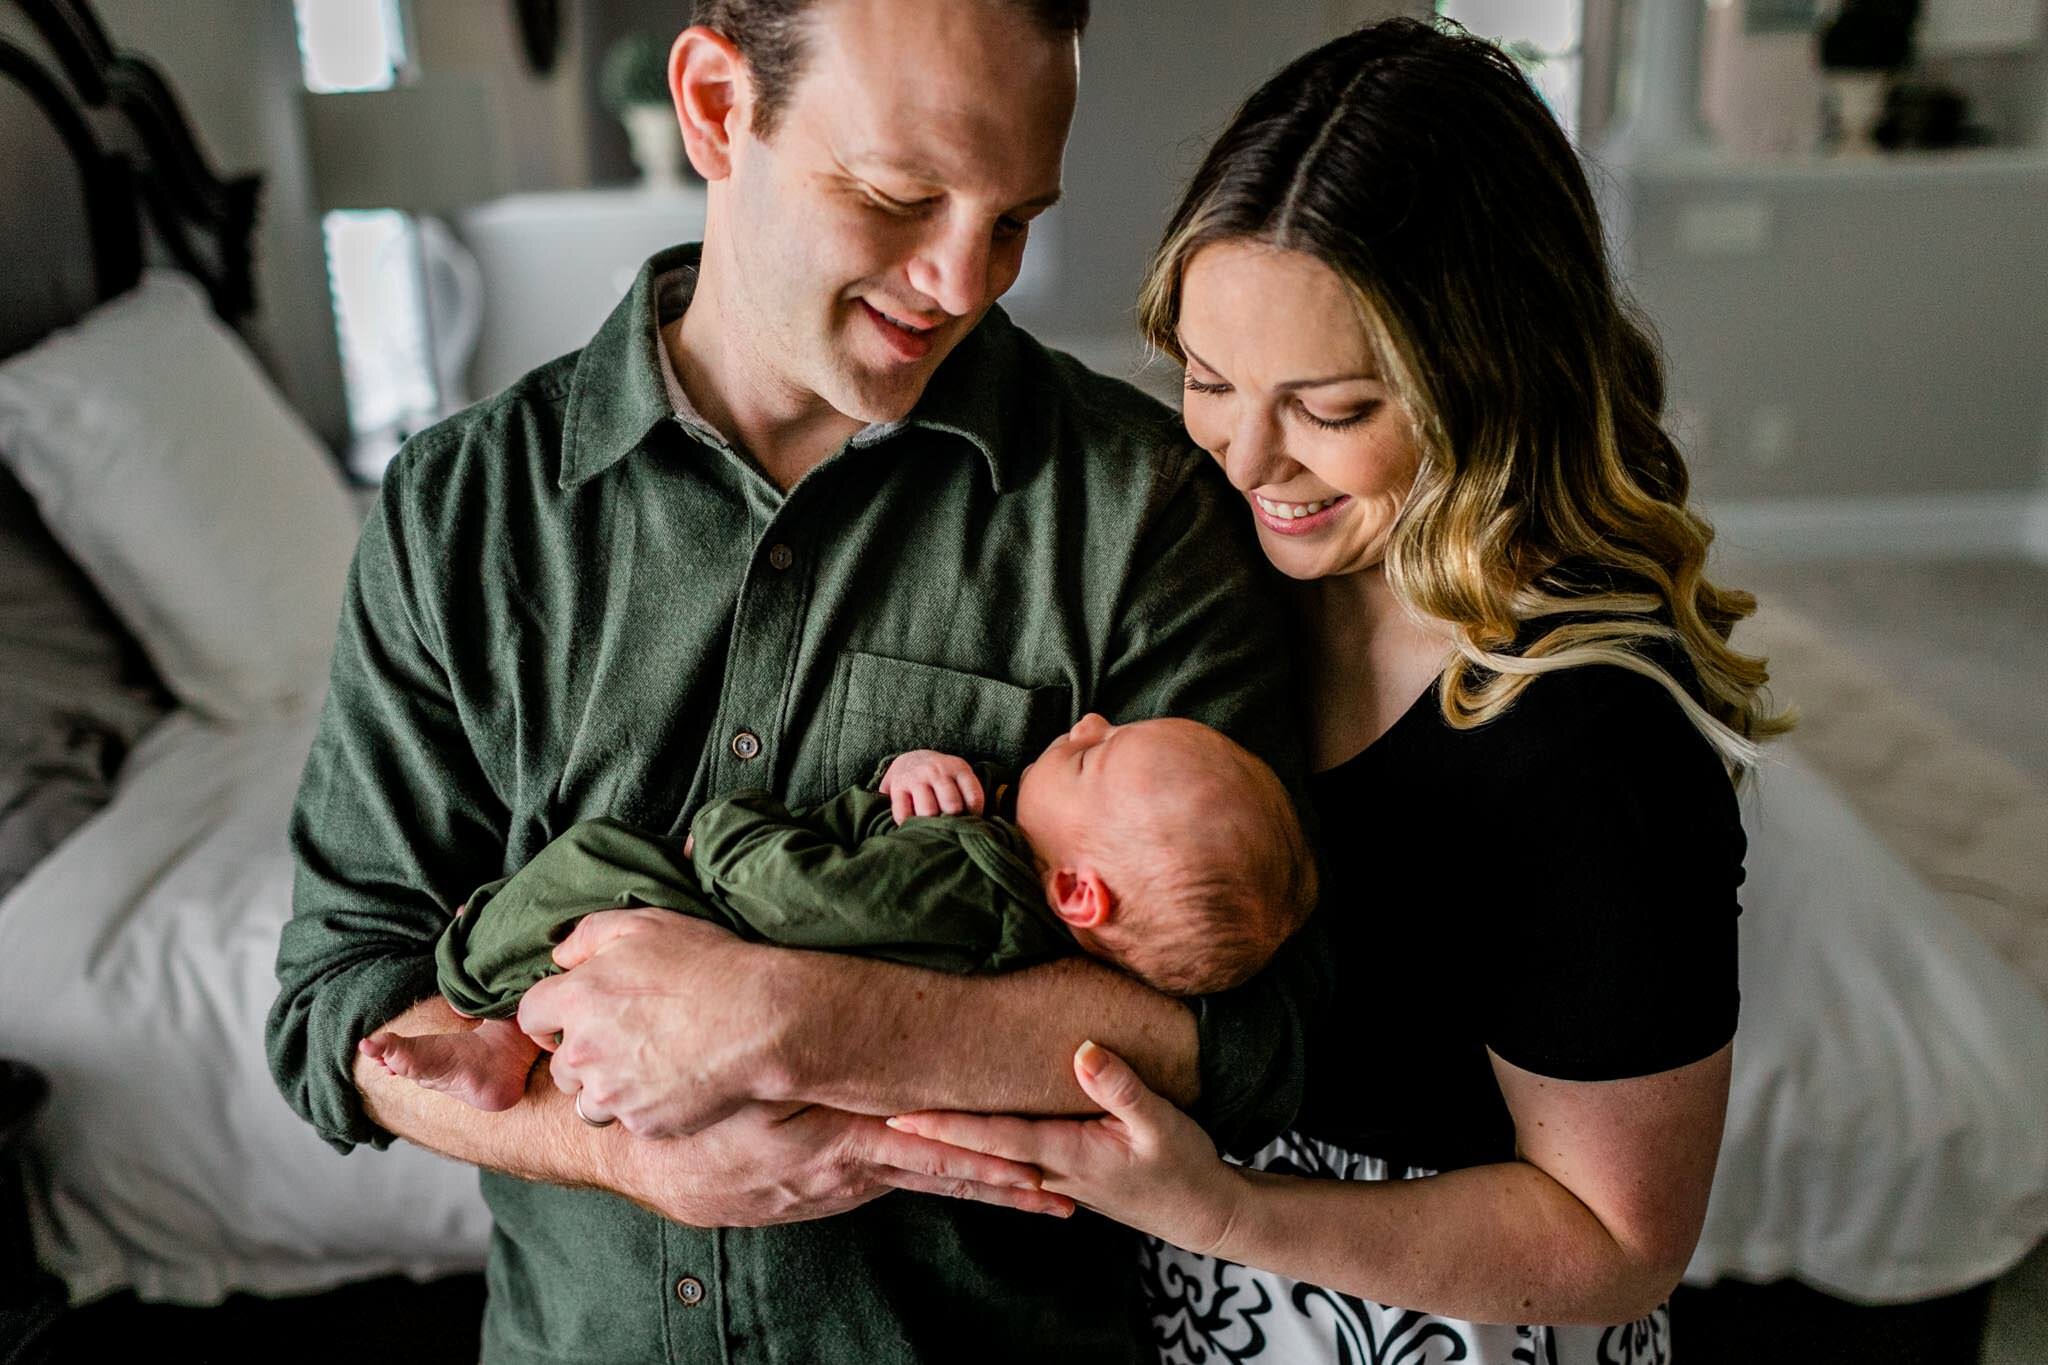 Raleigh Newborn Photographer | By G. Lin Photography | Beautiful lifestyle newborn family photo standing by window and holding baby